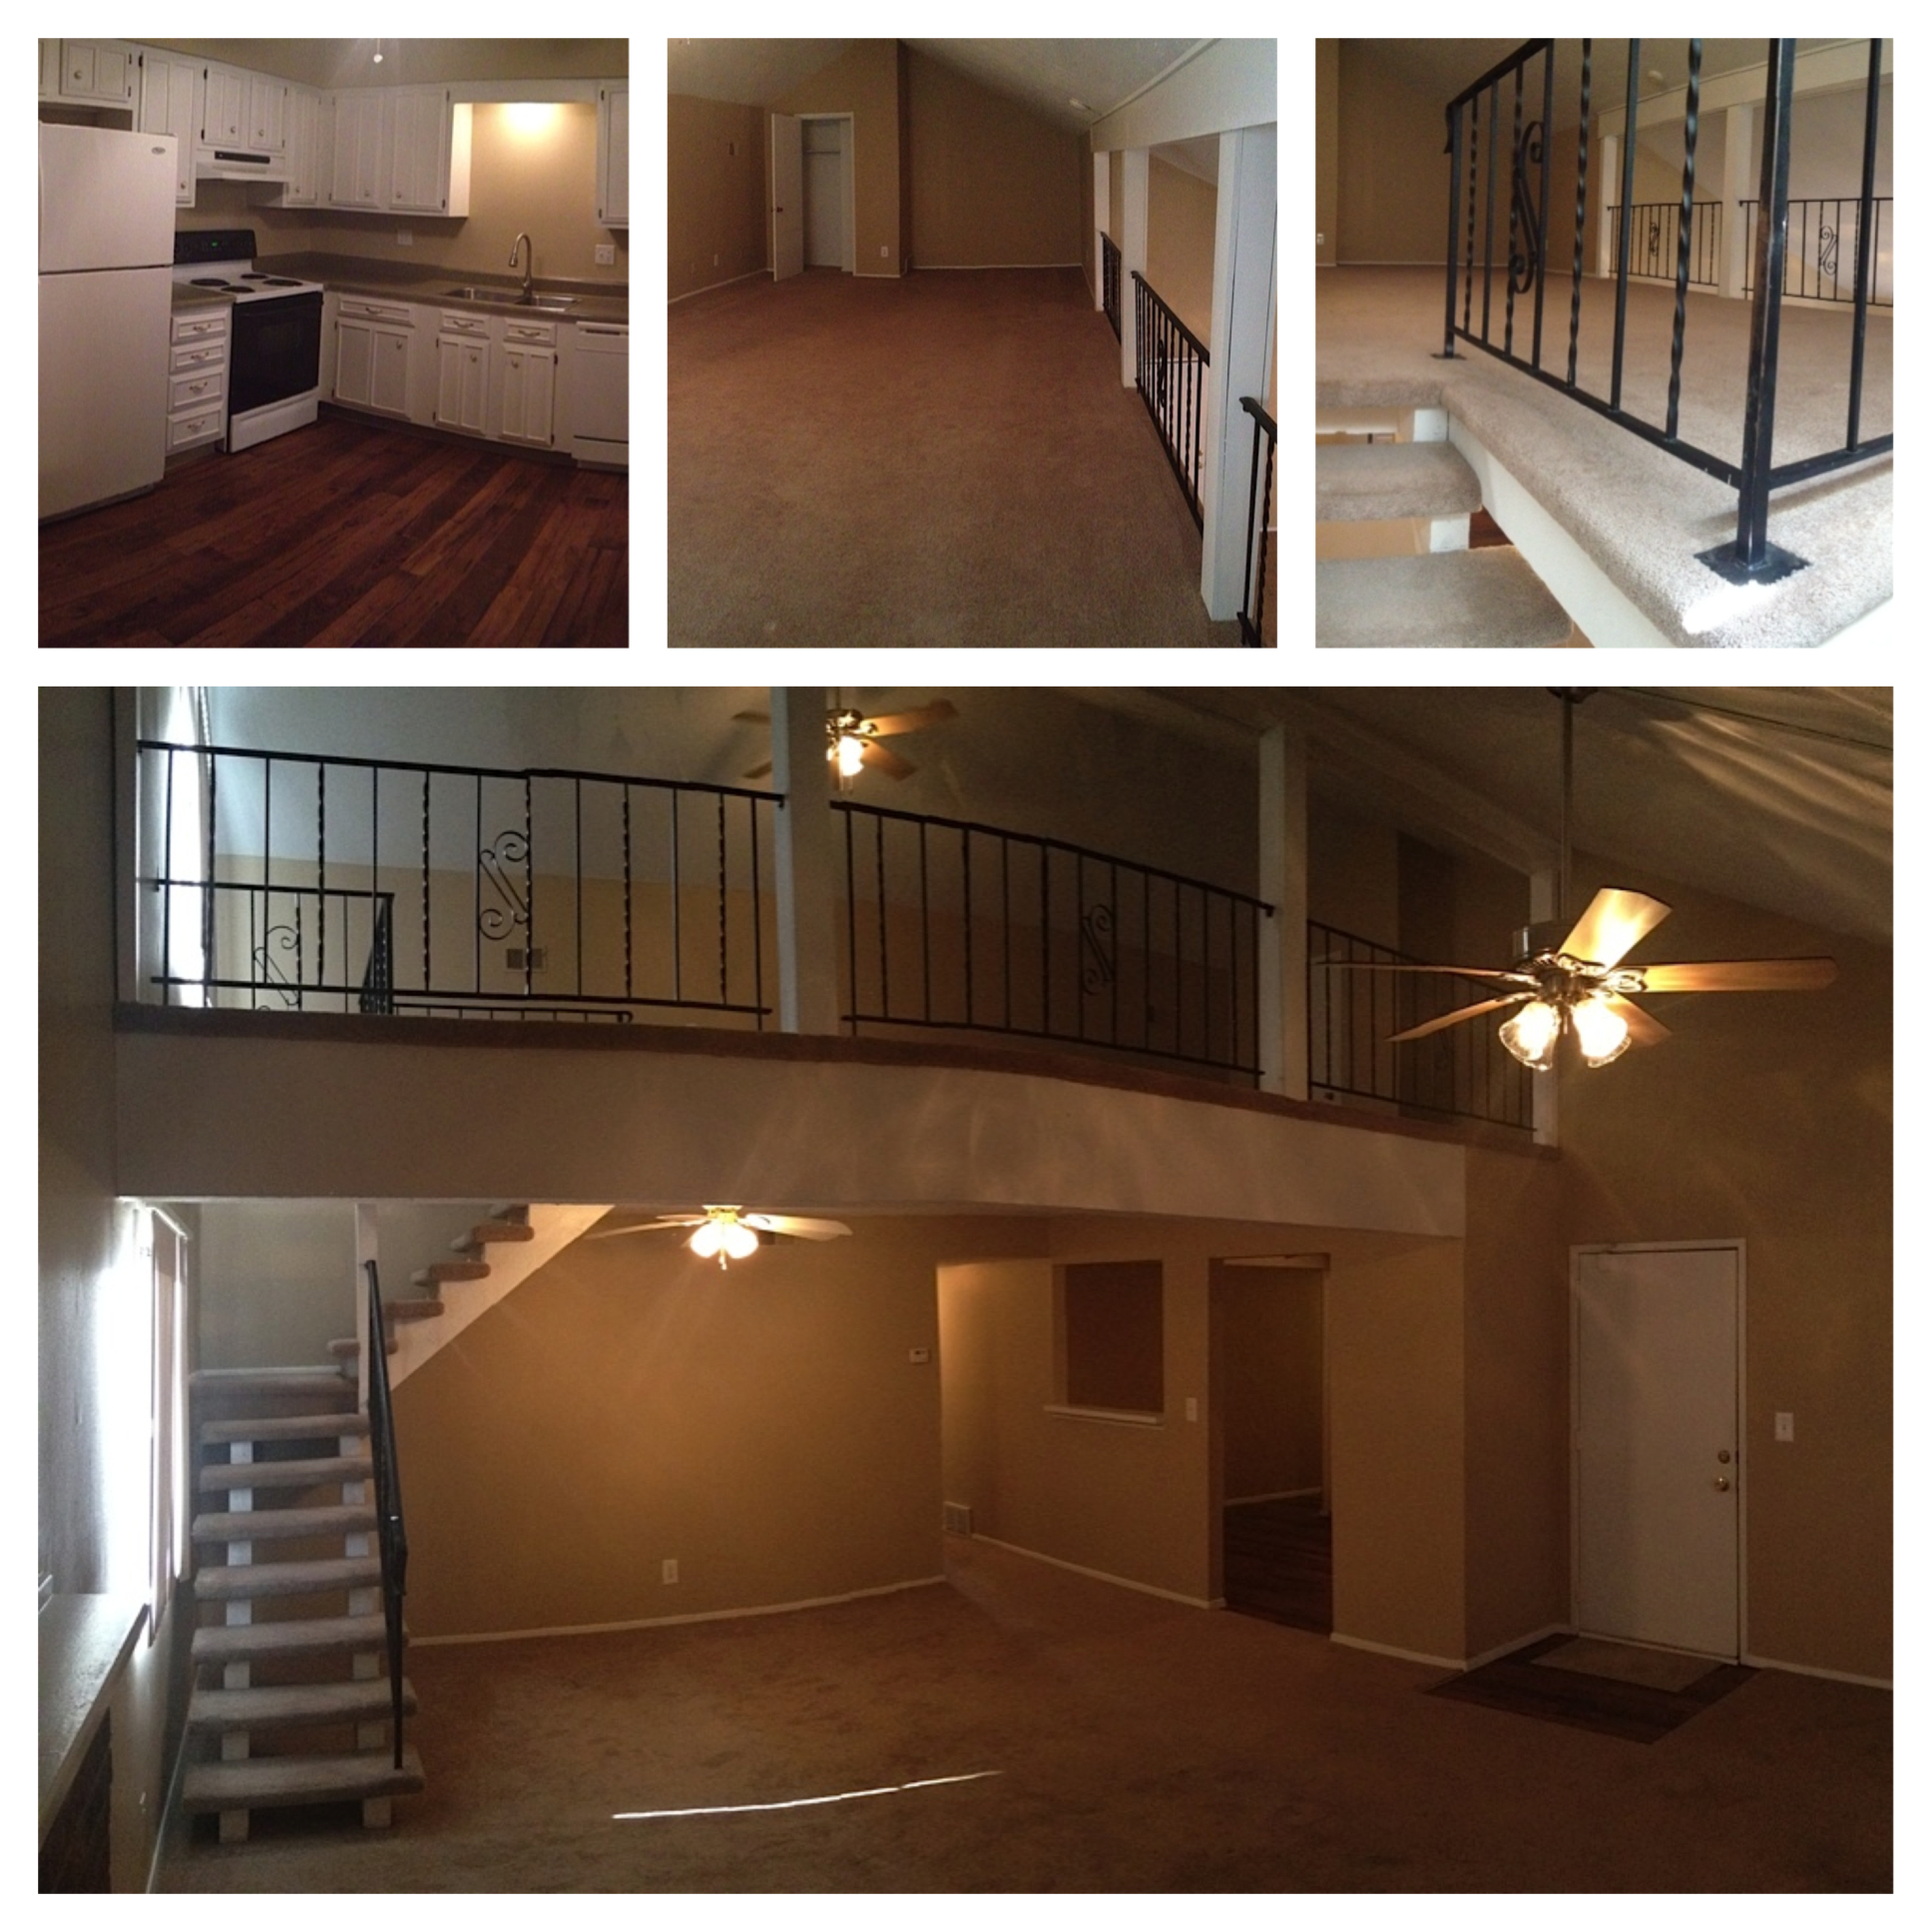 Spacious Two Bedroom Lofts Here At Cedar Heights Apartments